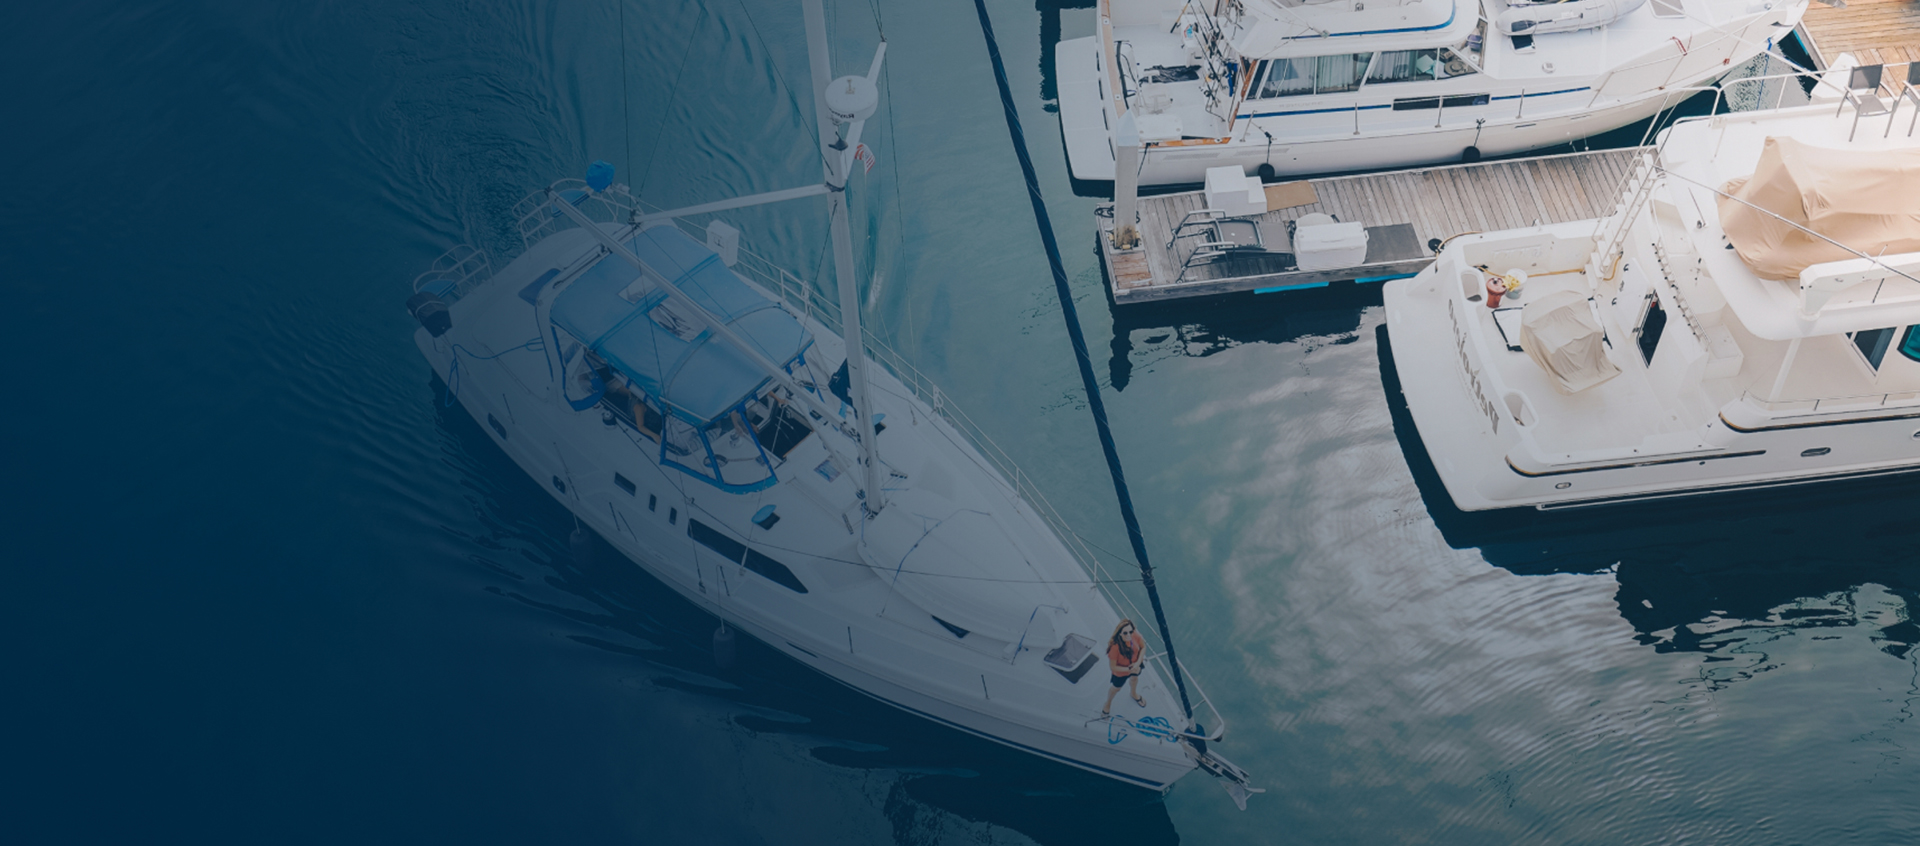 All information about Sailing Yachts in one place